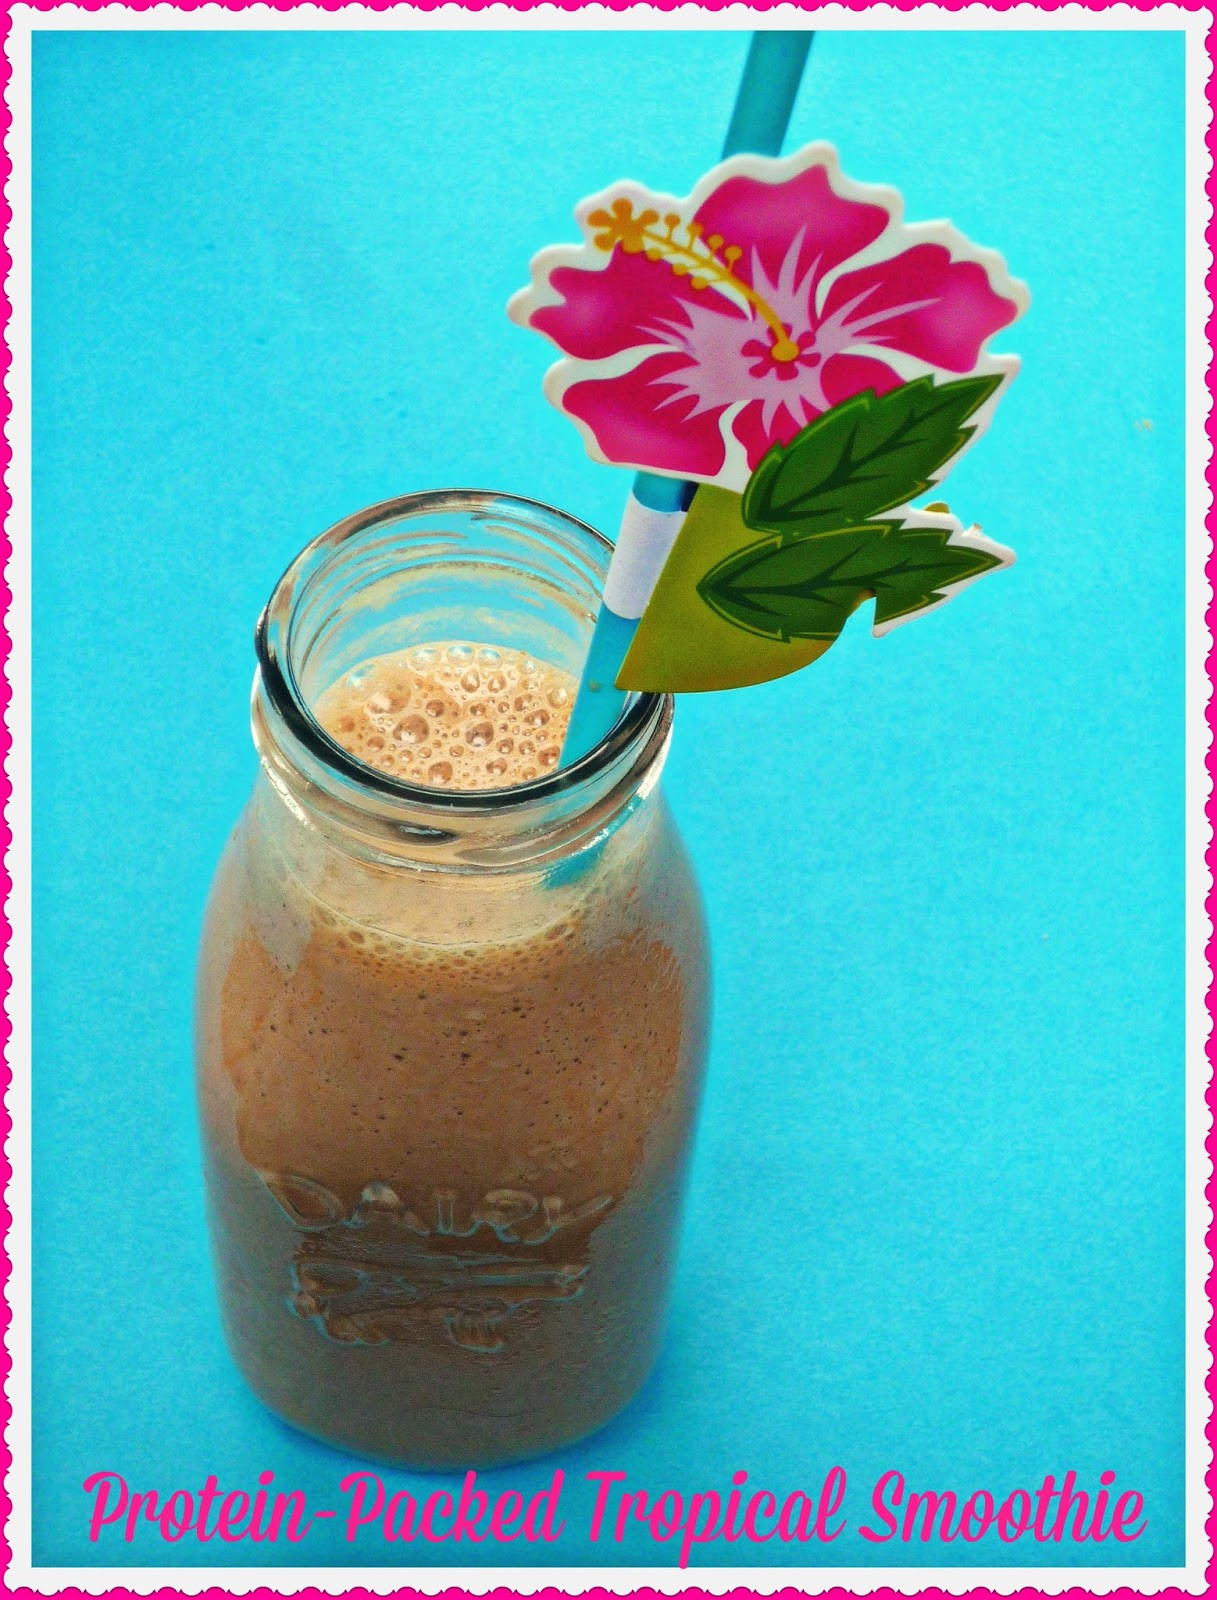 Nutritionist Smoothie Recipes
 tropical smoothie nutrition